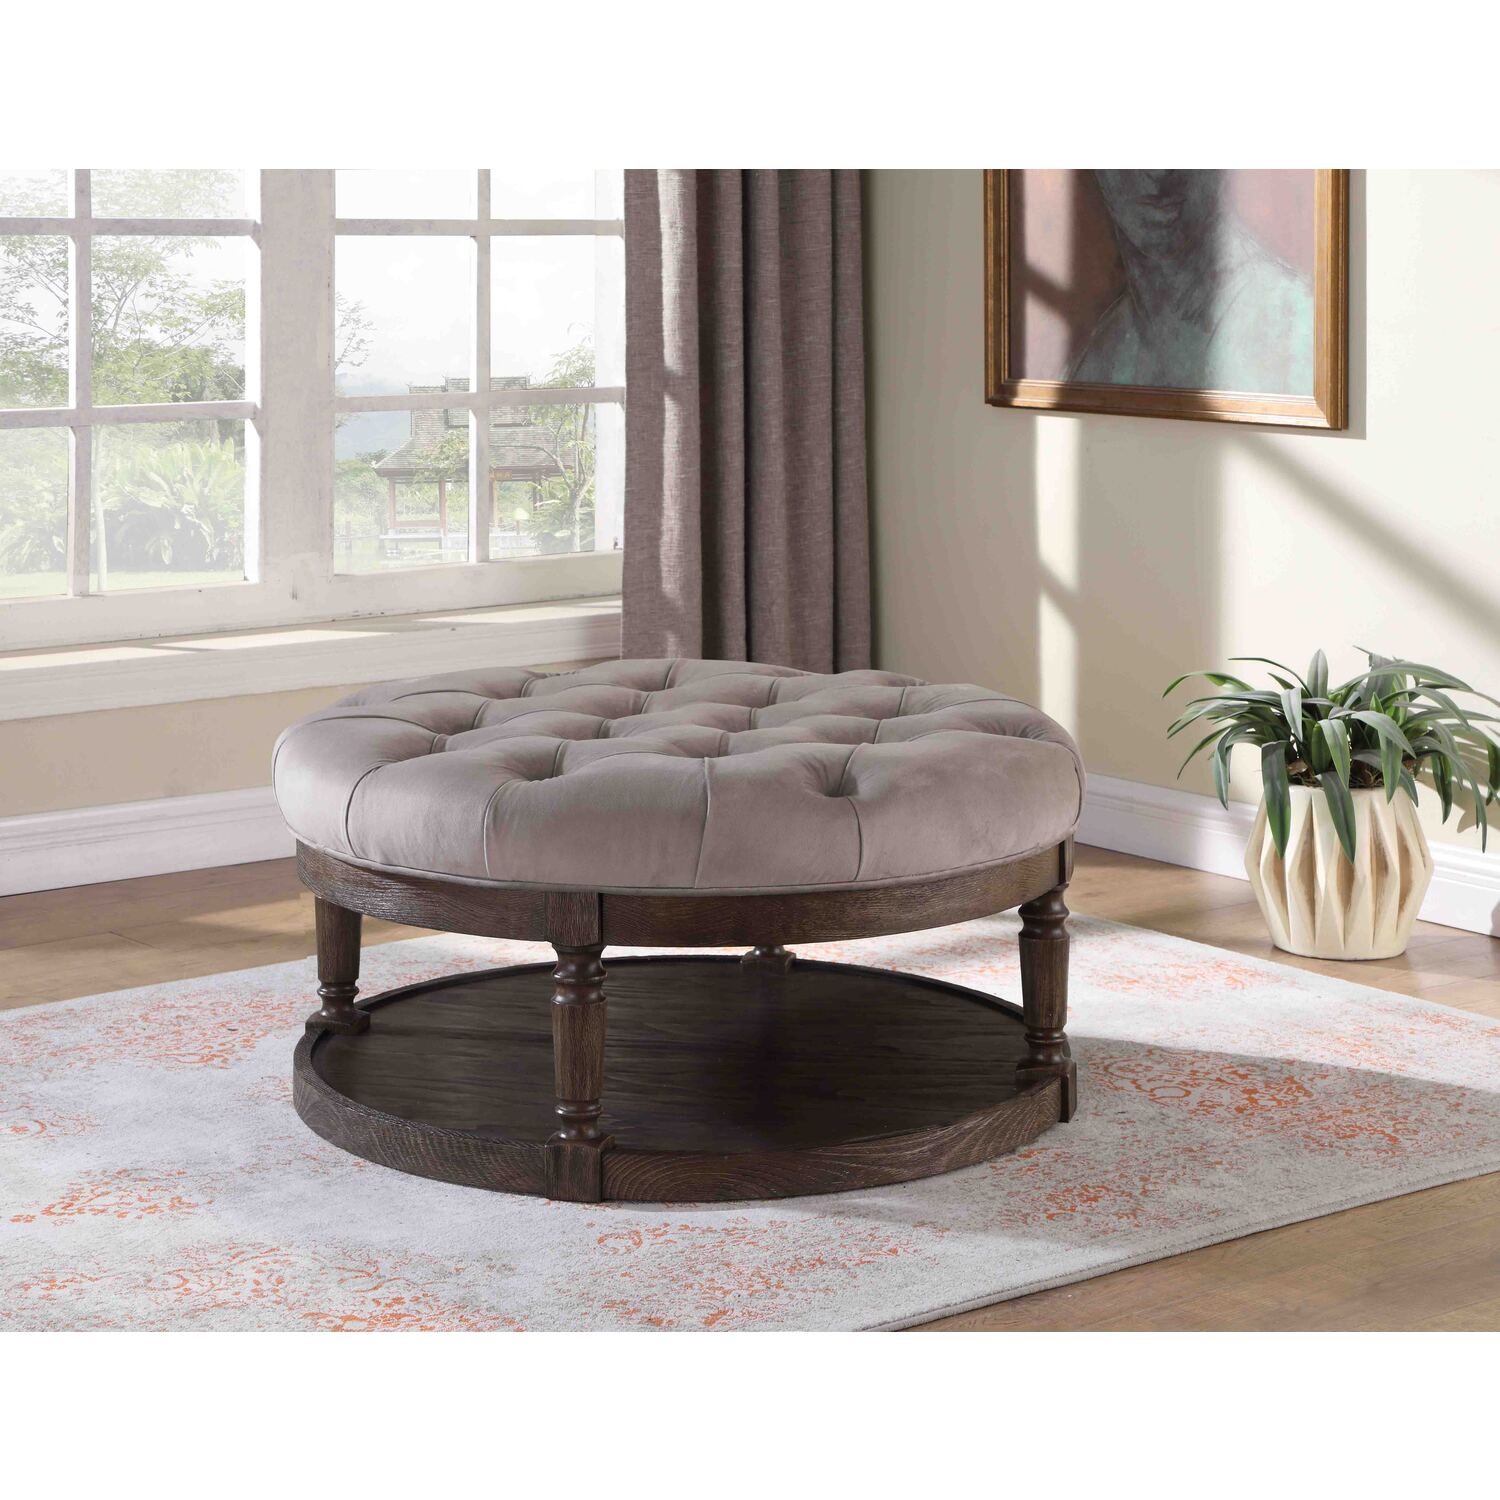 Best Master Linen Fabric Upholstered Round Ottoman in Otter/Smoked Rustic Gray - image 2 of 2